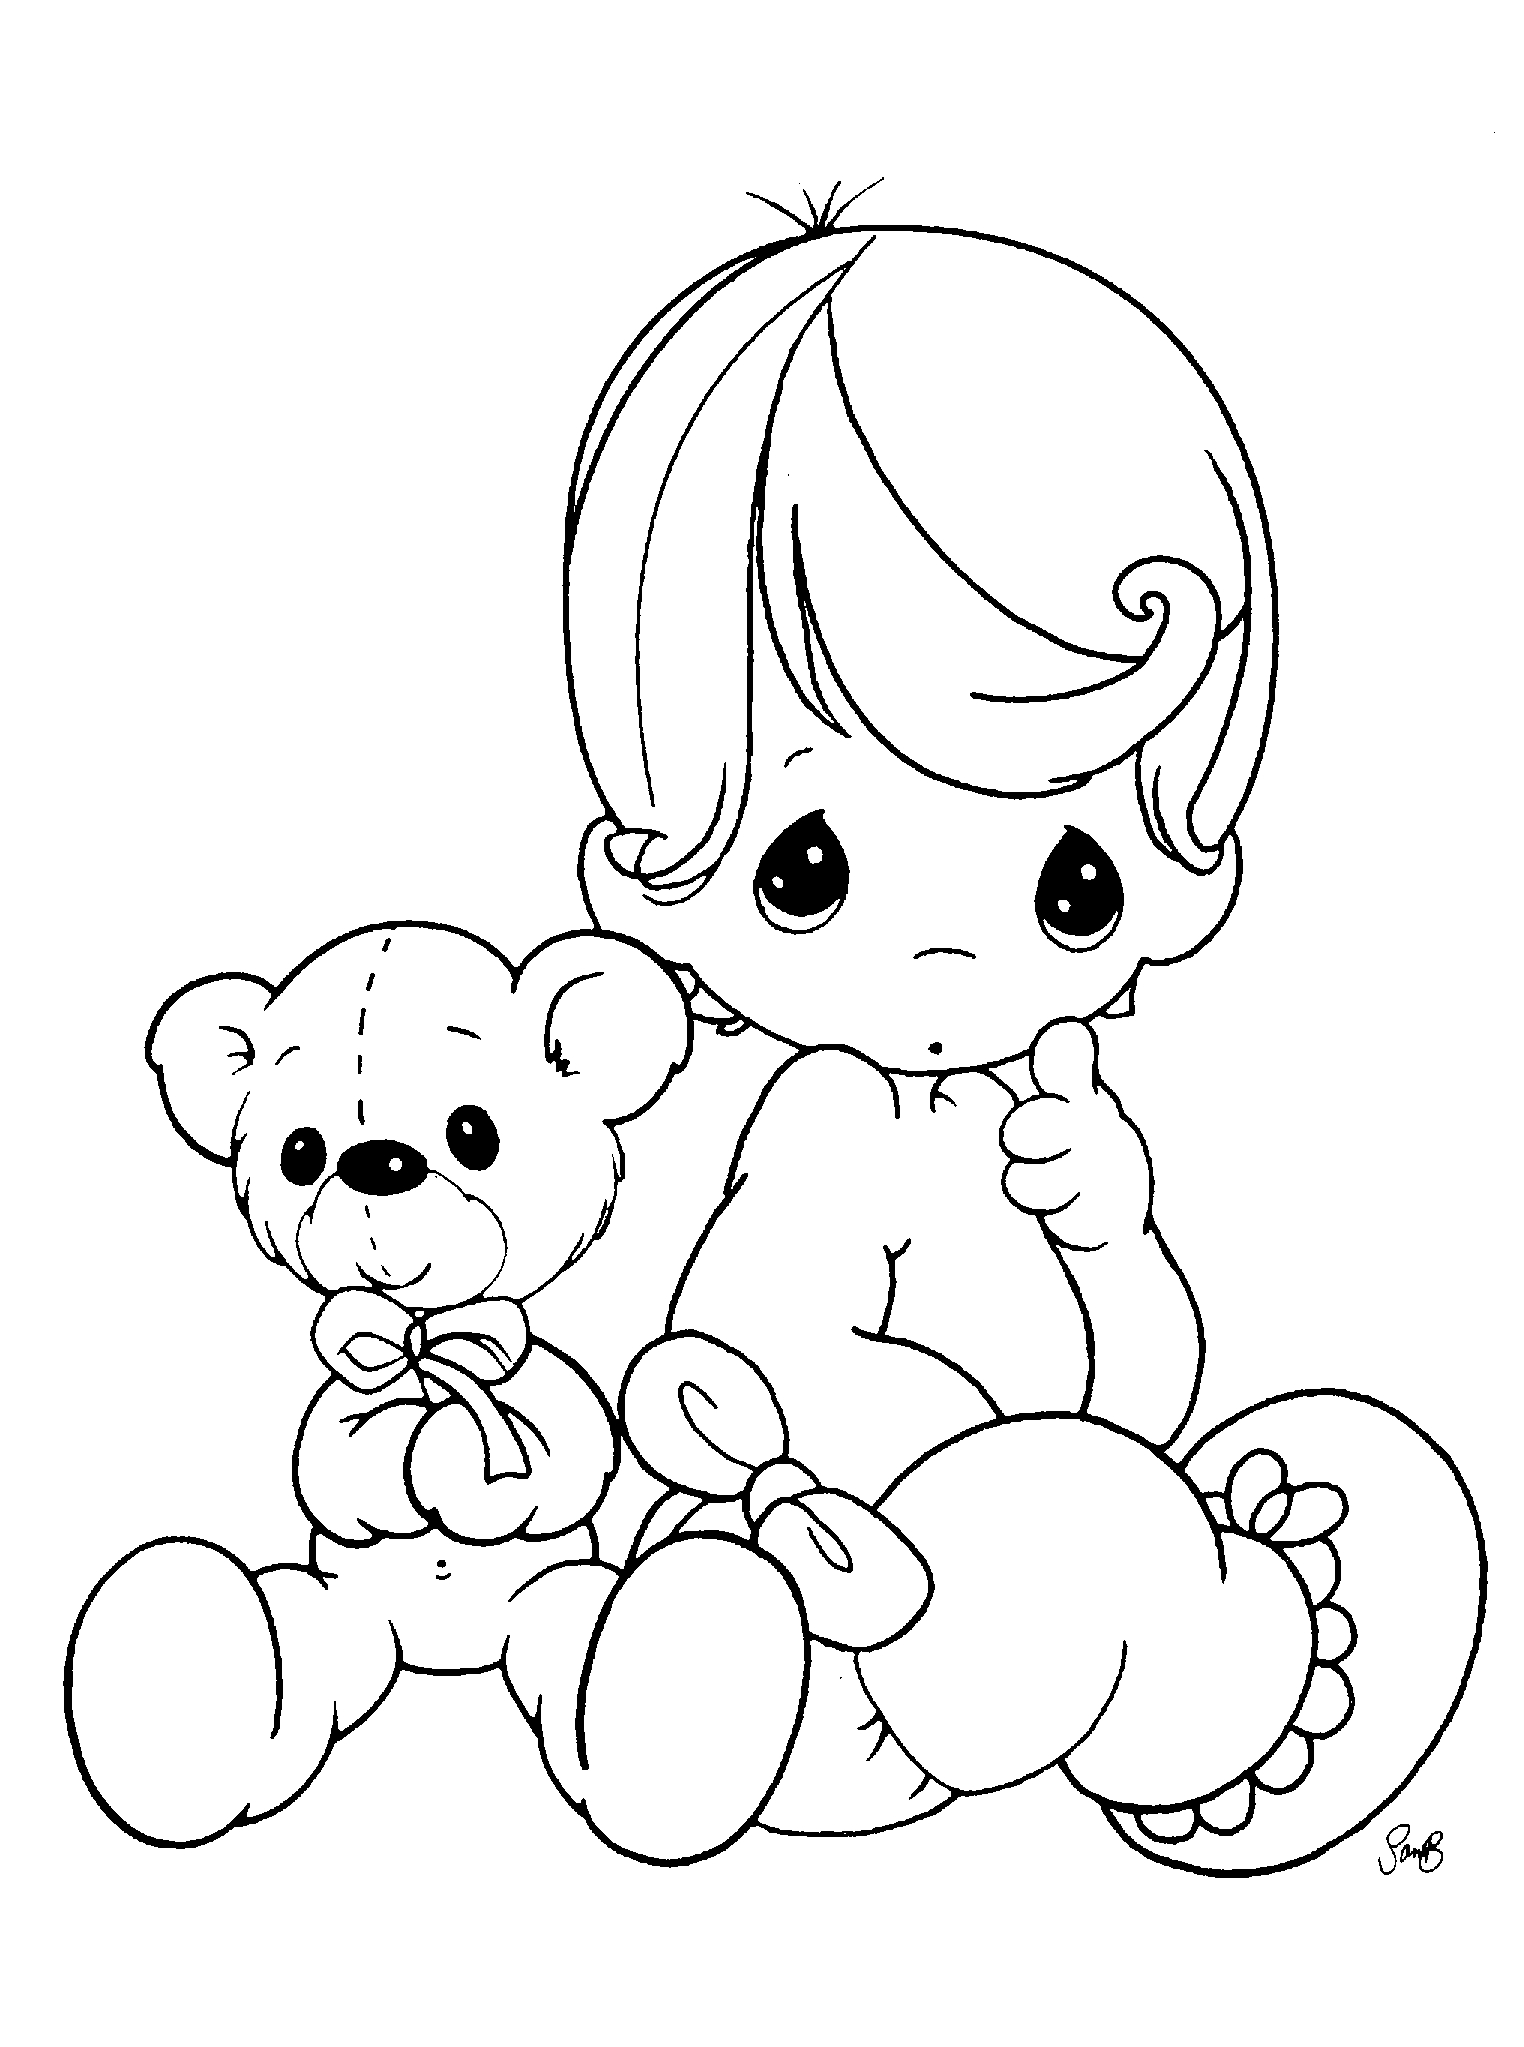 Precious Moments Letters Coloring Pages Coloring Pages Coloring Pages Freeintableecious Moments For Kids